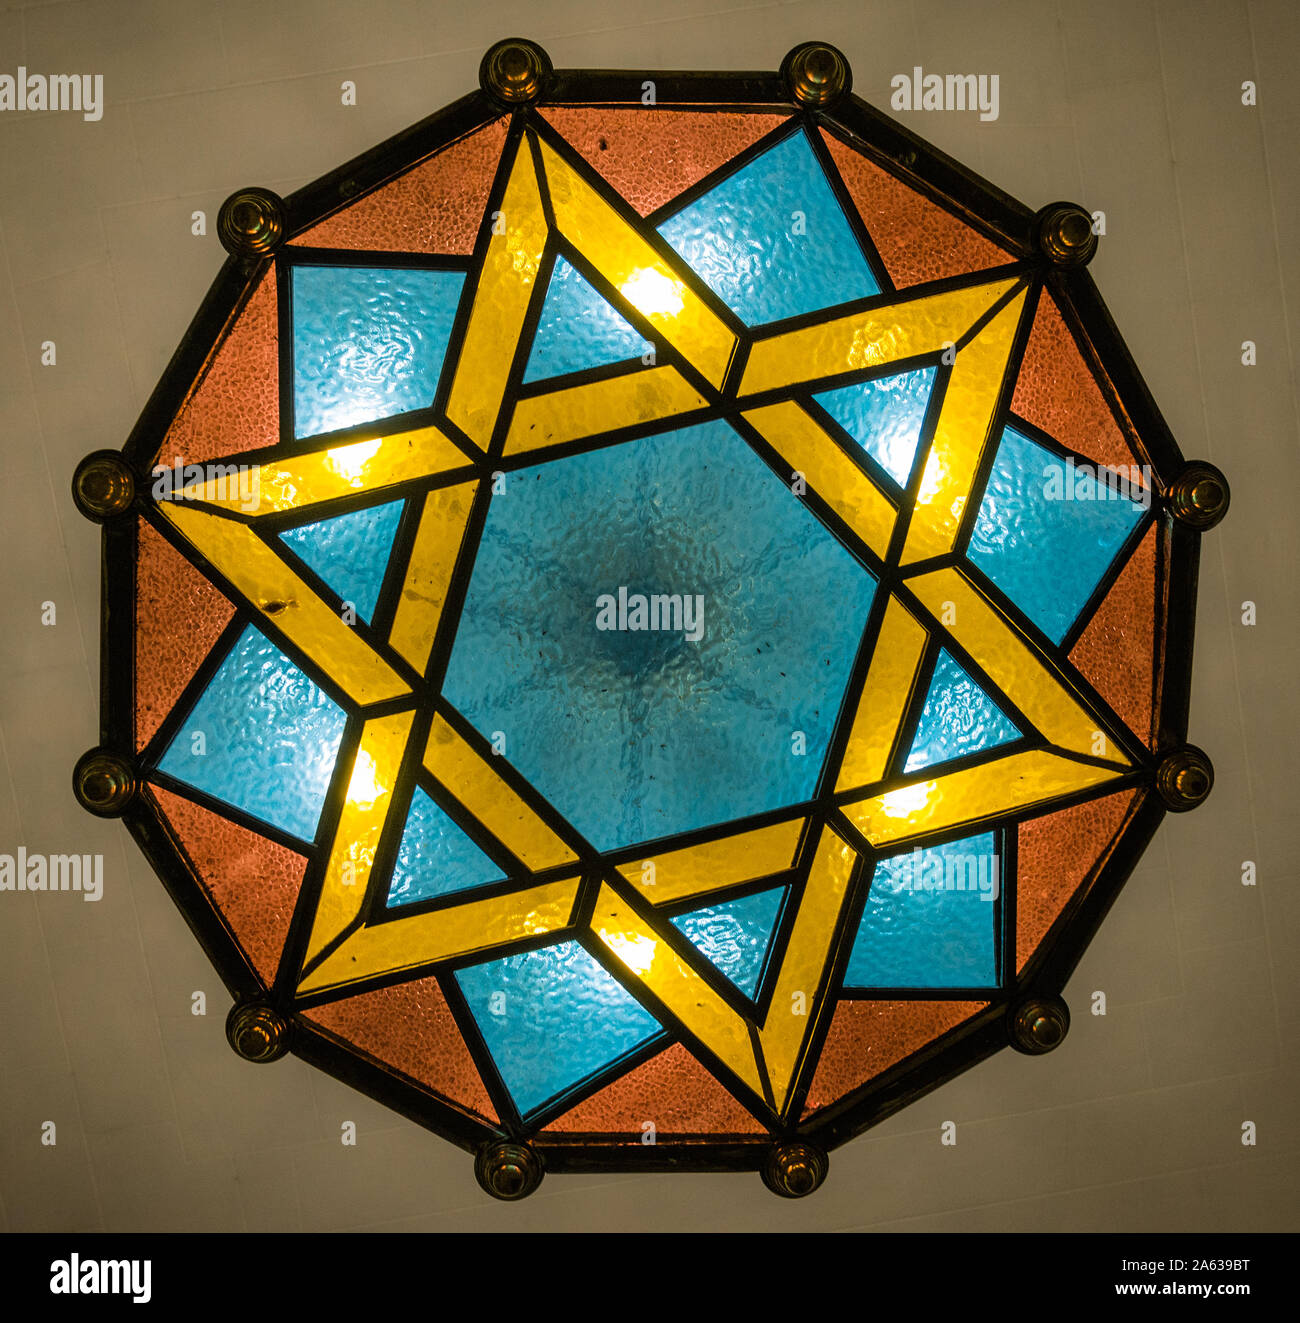 Colorful Star of David Judaism religion symbol on a lamp. Stock Photo